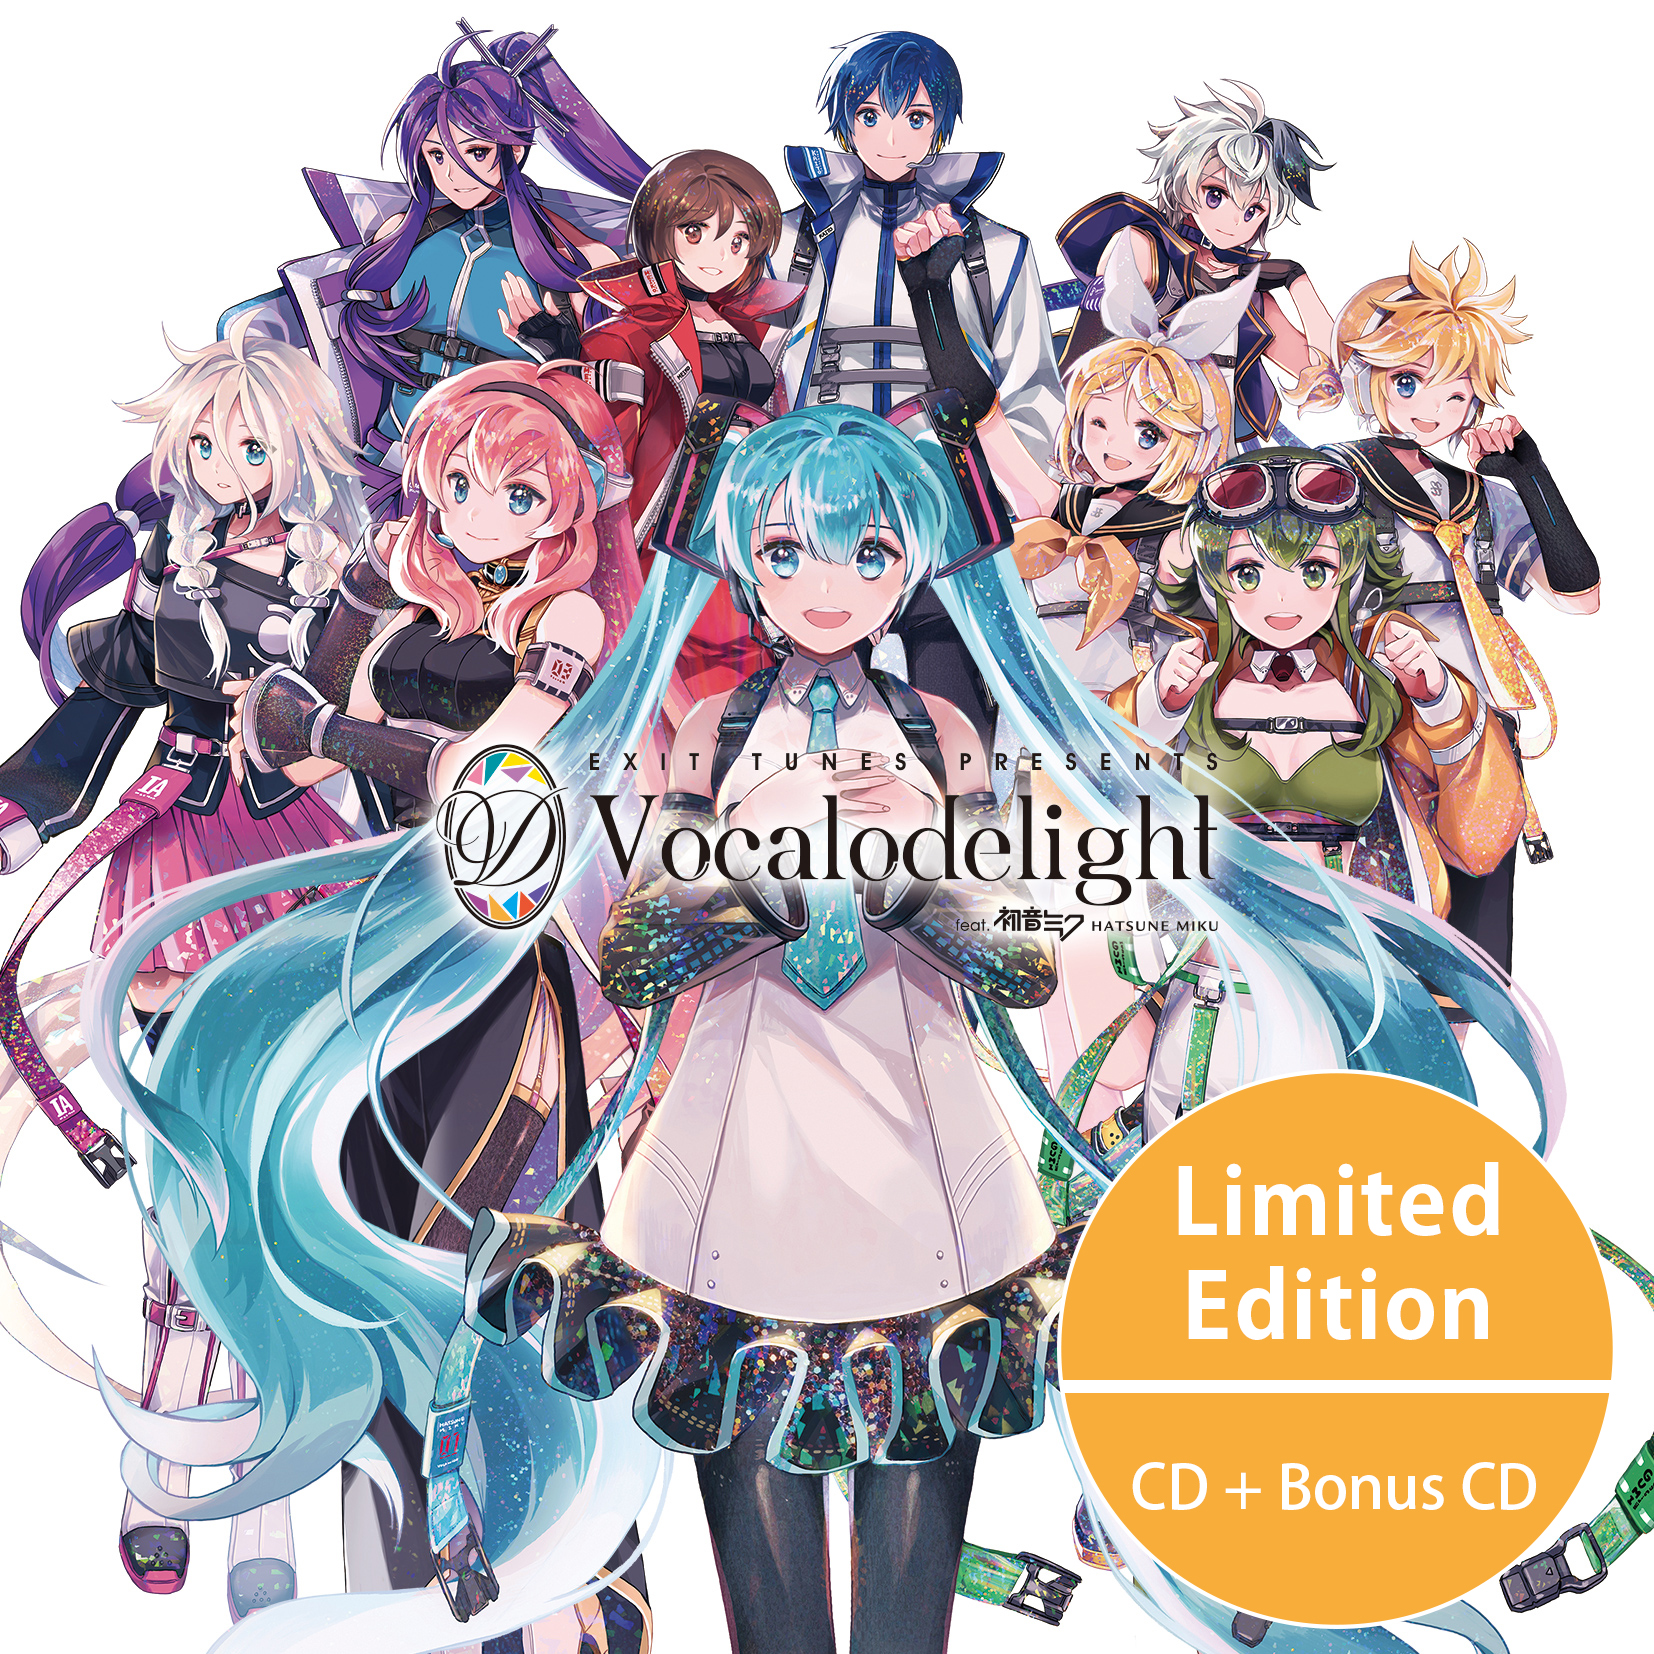 EXIT TUNES PRESENTS Vocalodelight feat. Hatsune Miku Limited Edition(CD+Bonus CD) Release on December15th, 2021 No.1